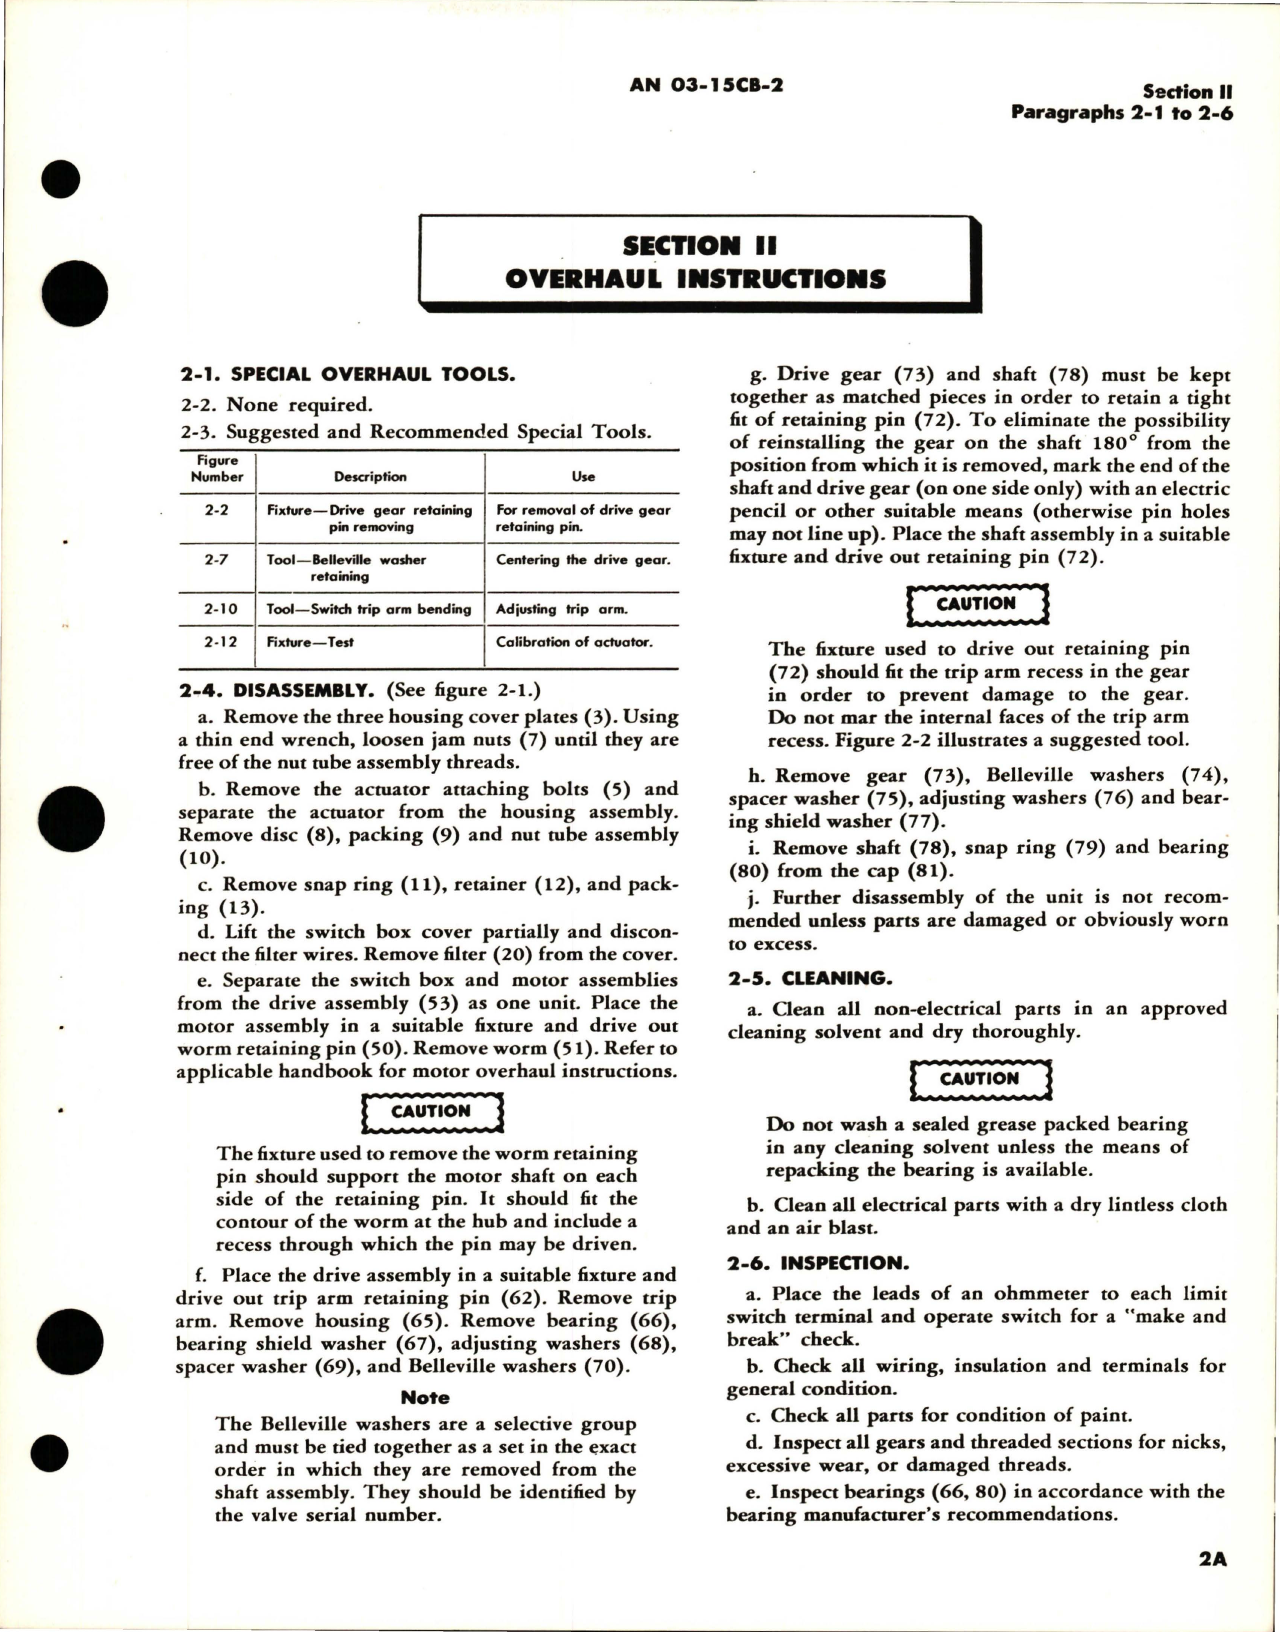 Sample page 7 from AirCorps Library document: Overhaul Instructions for Oil Diverter Valves